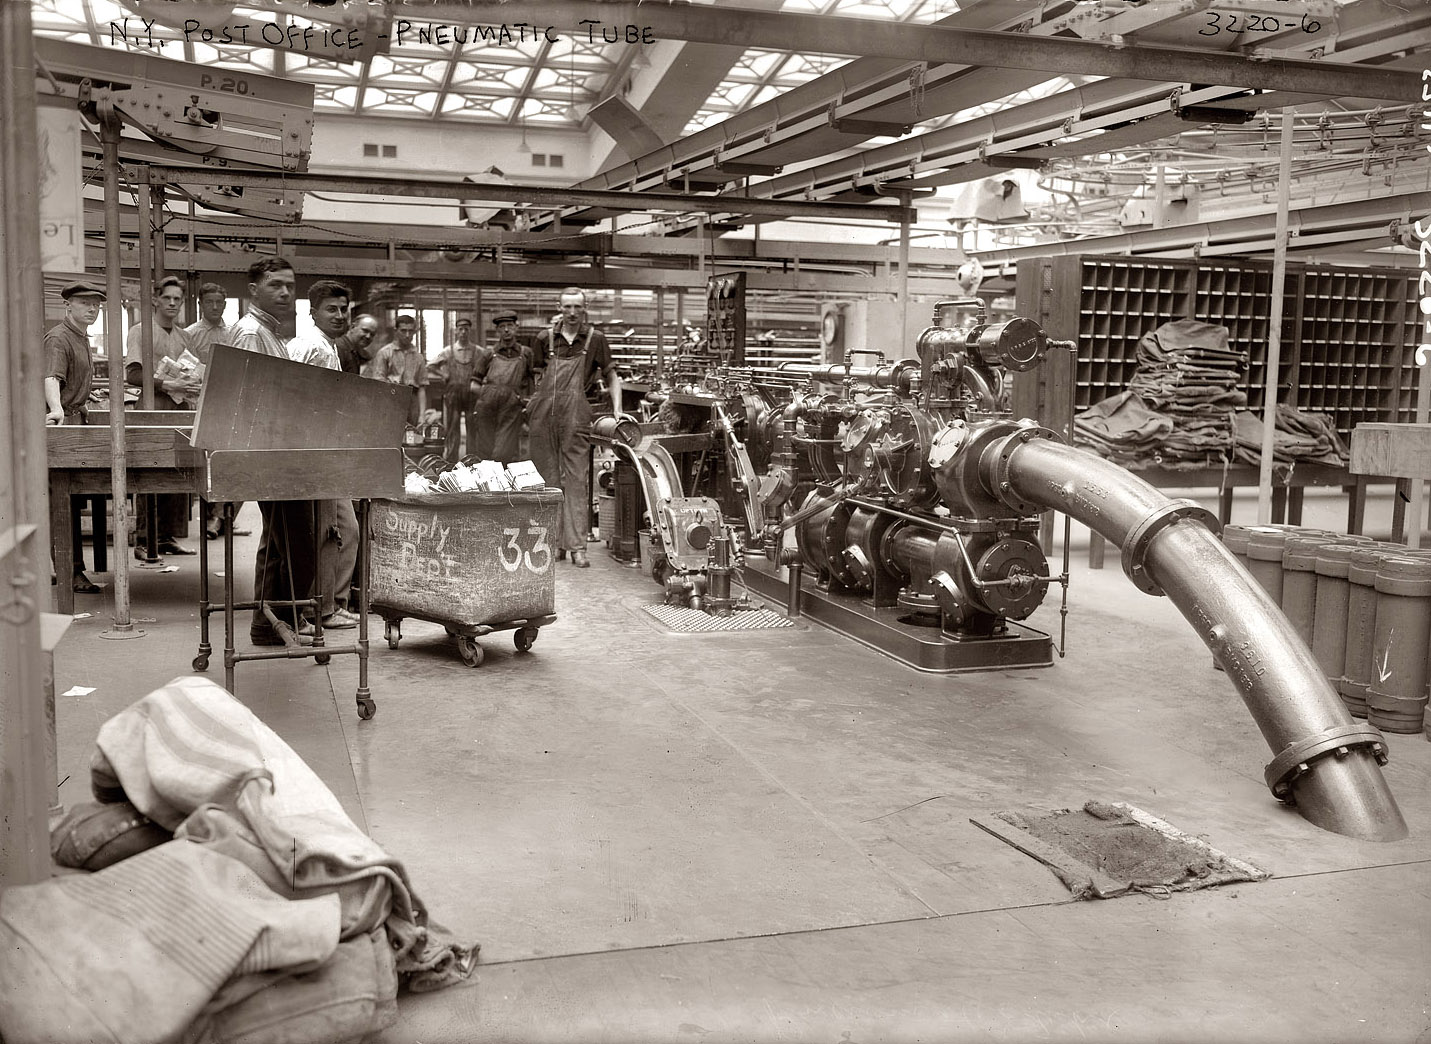 "N.Y. Post Office Pneumatic Tube" c. 1912. View full size. G.G. Bain Collection.